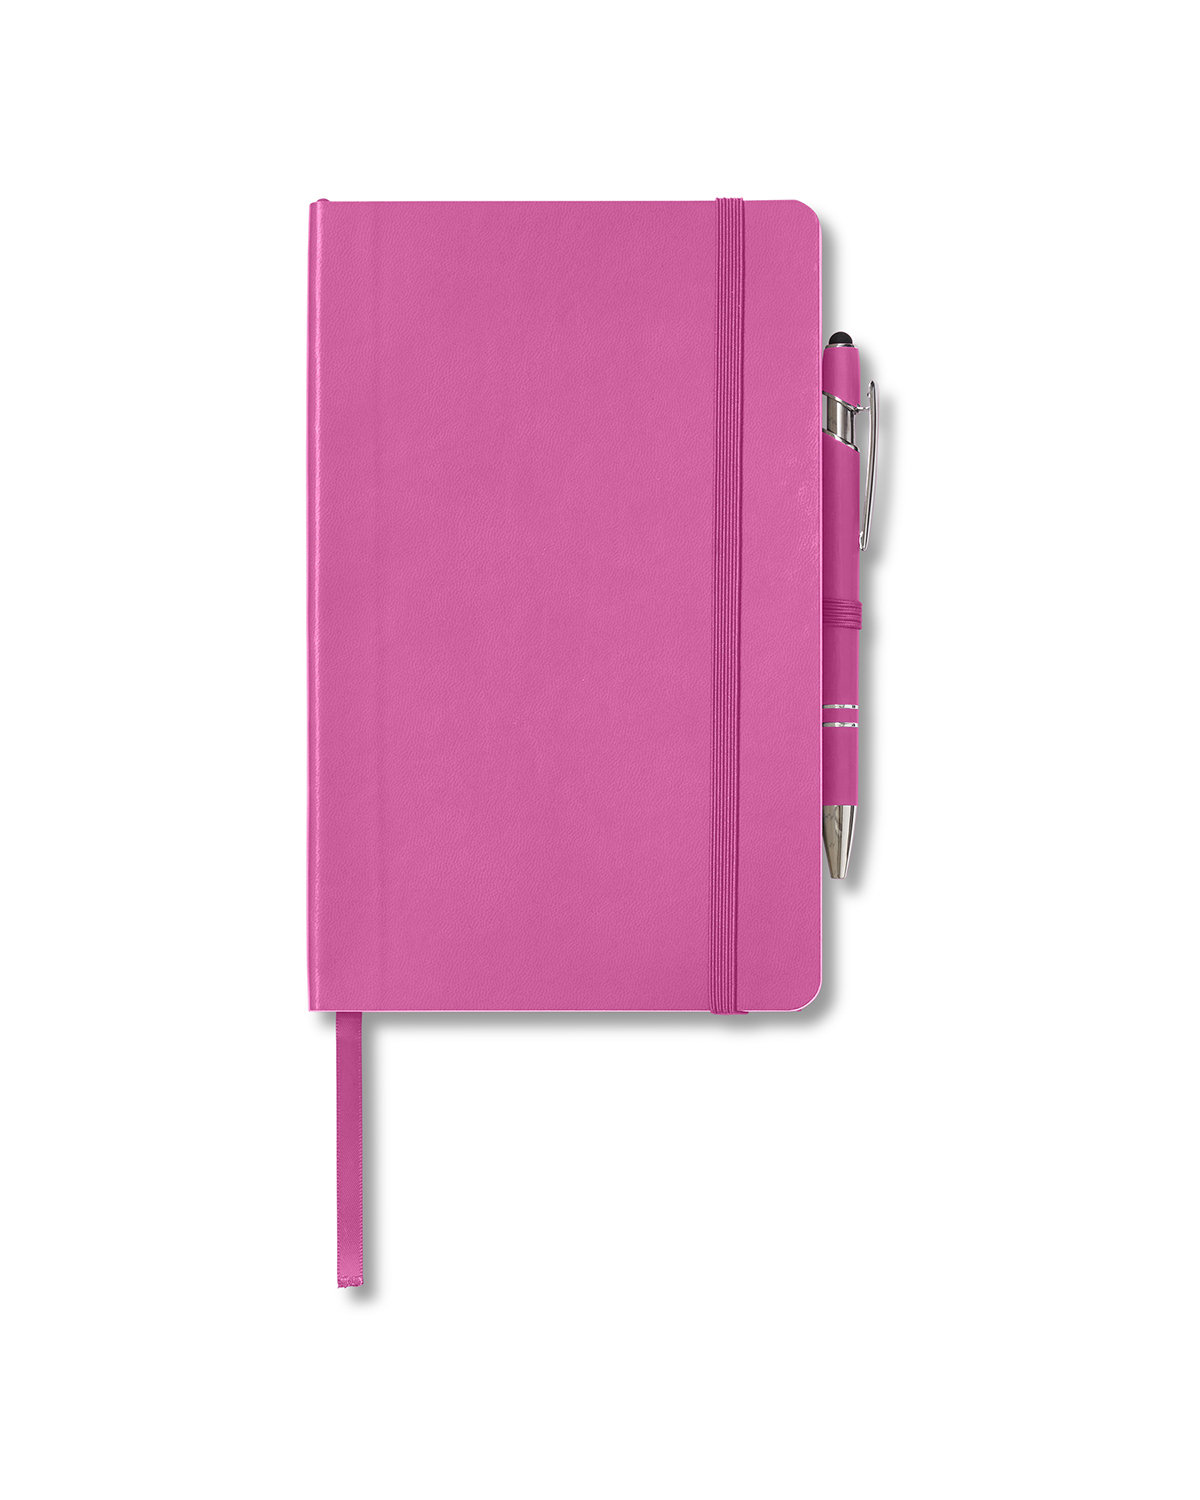 CORE365 Soft Cover Journal And Pen Set charity pink 